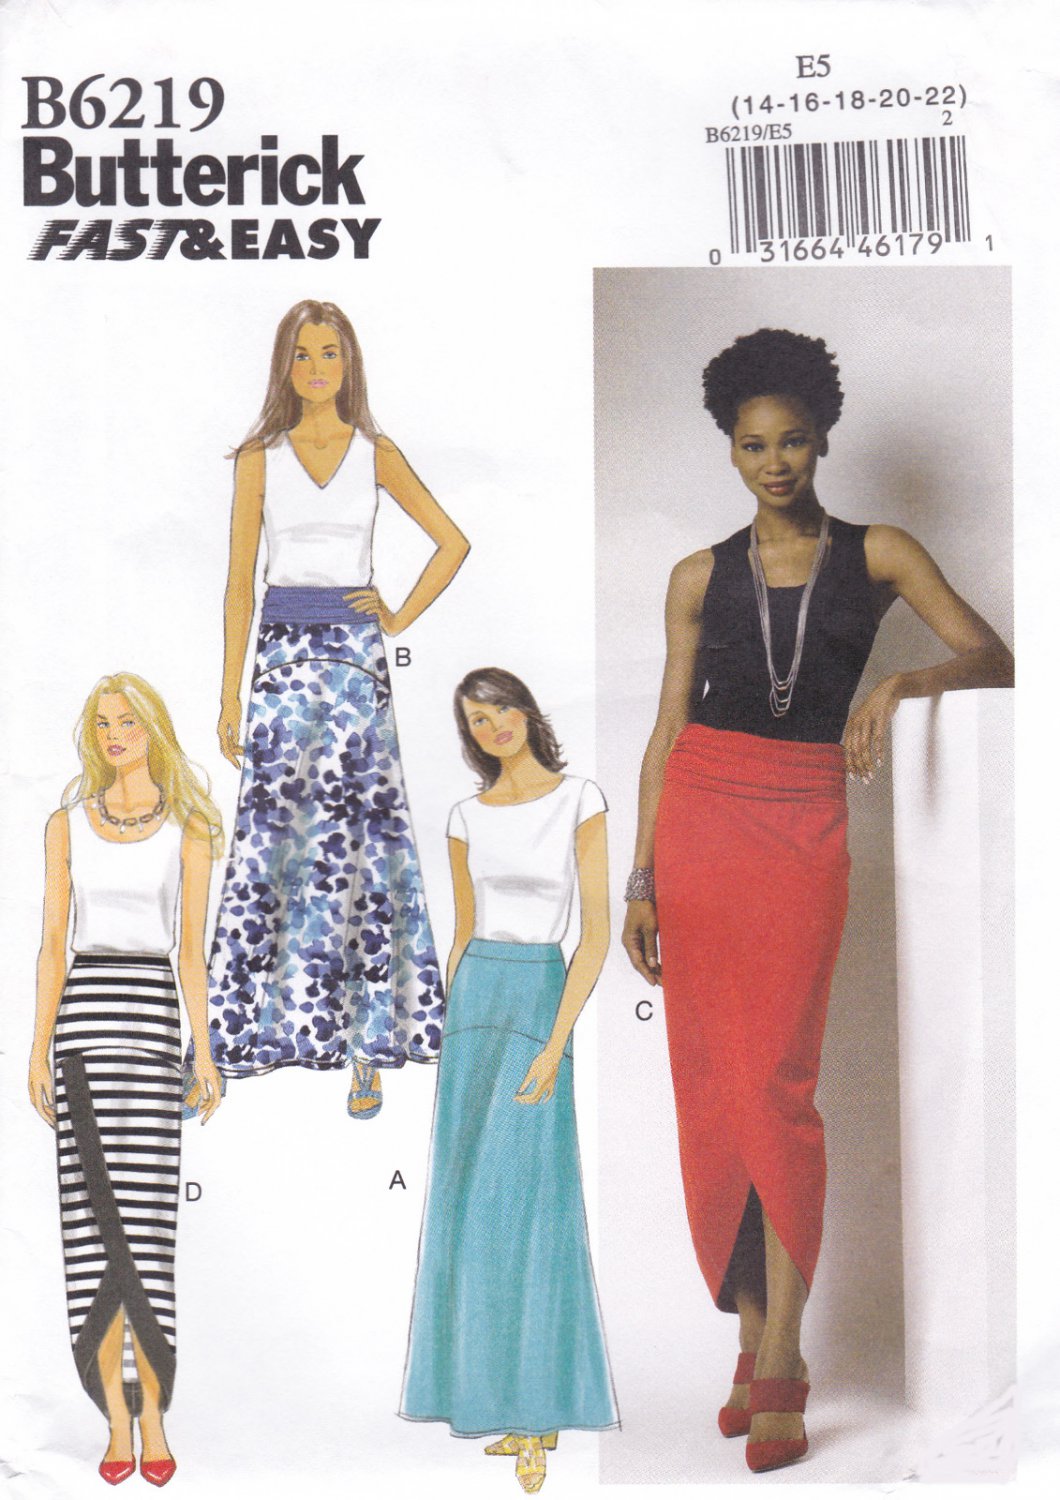 Butterick B6219 6219 Womens Misses Skirts Sewing Pattern Elastic Waist Sizes 14-16-18-20-22